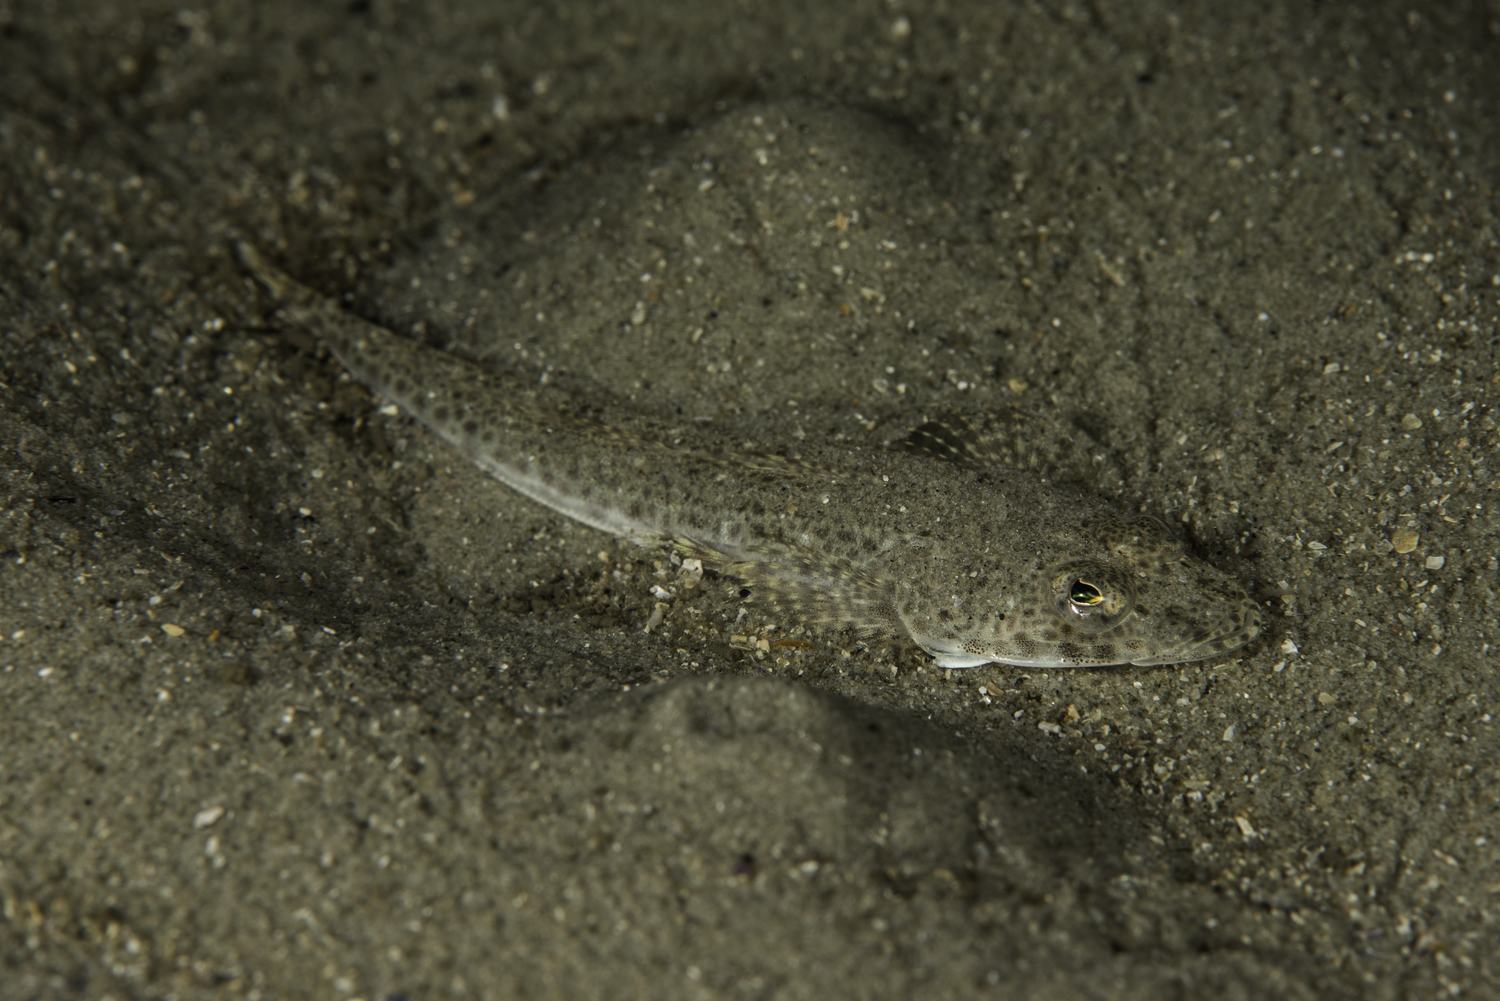 Image of a southern sand flathead laying on bottom of sand